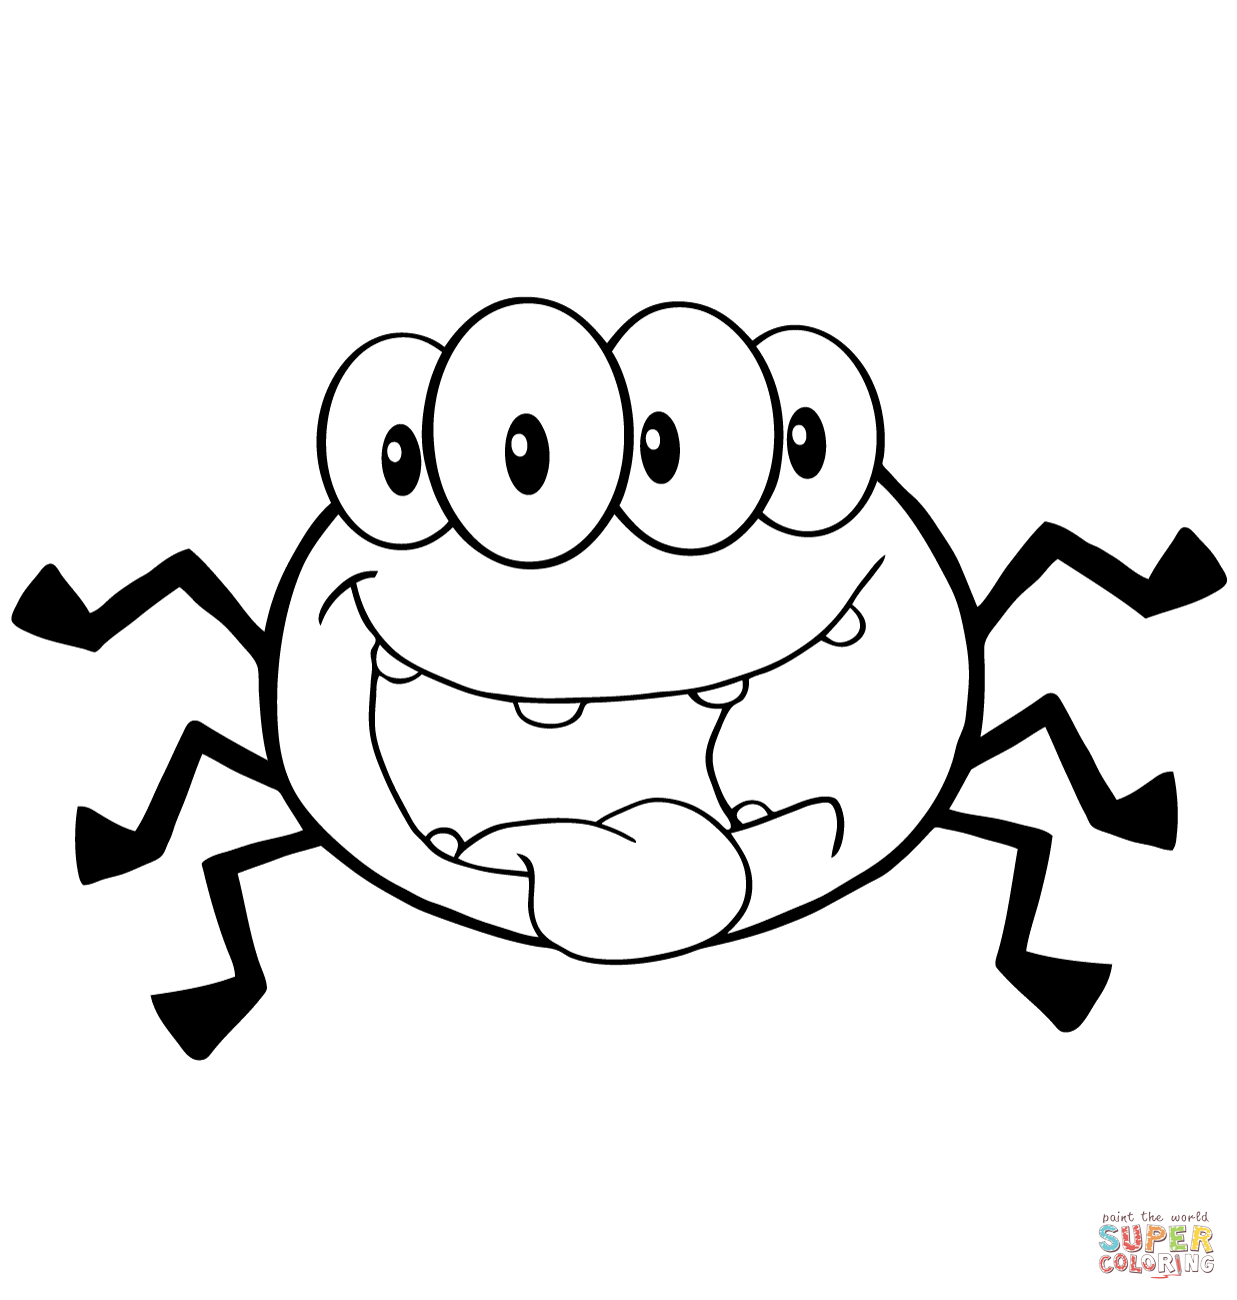 Spider coloring #15, Download drawings